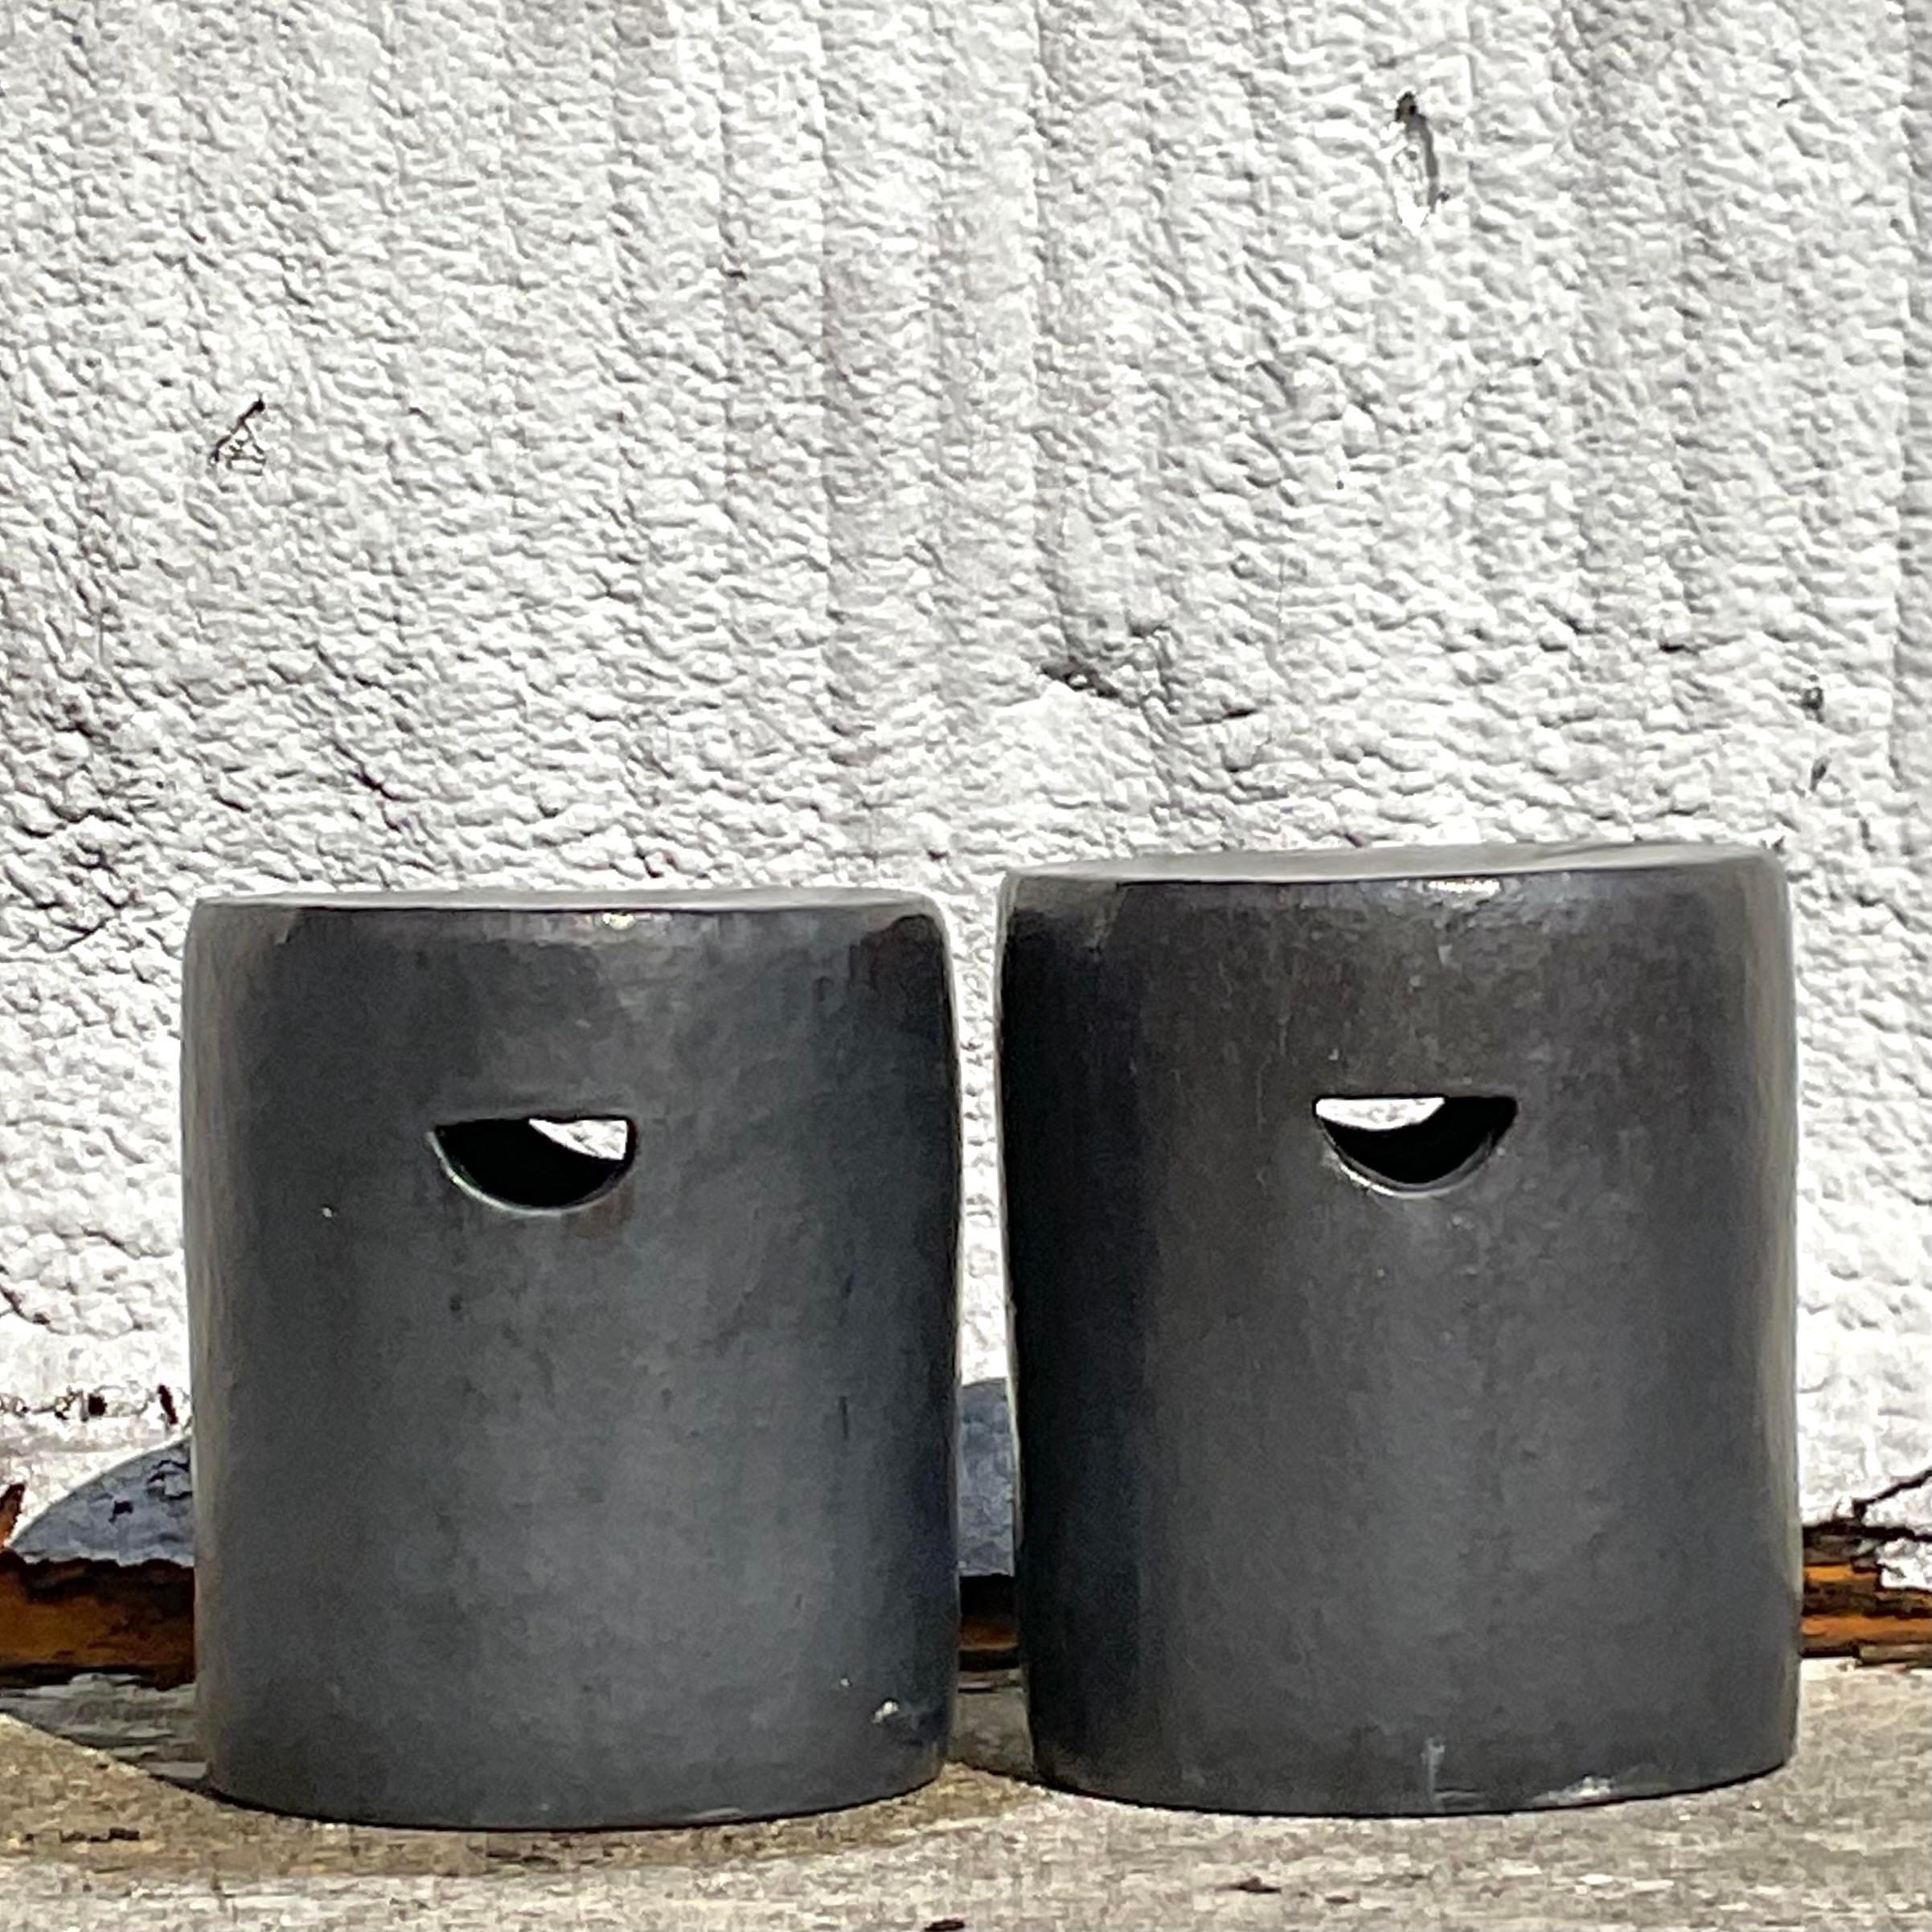 A fabulous pair of vintage Boho low stools. Chic matte glazed ceramic in a dark charcoal color. Perfect indoors or outside. A clean contemporary design with half moon cutouts for handles. Acquired from a Palm Beach estate.